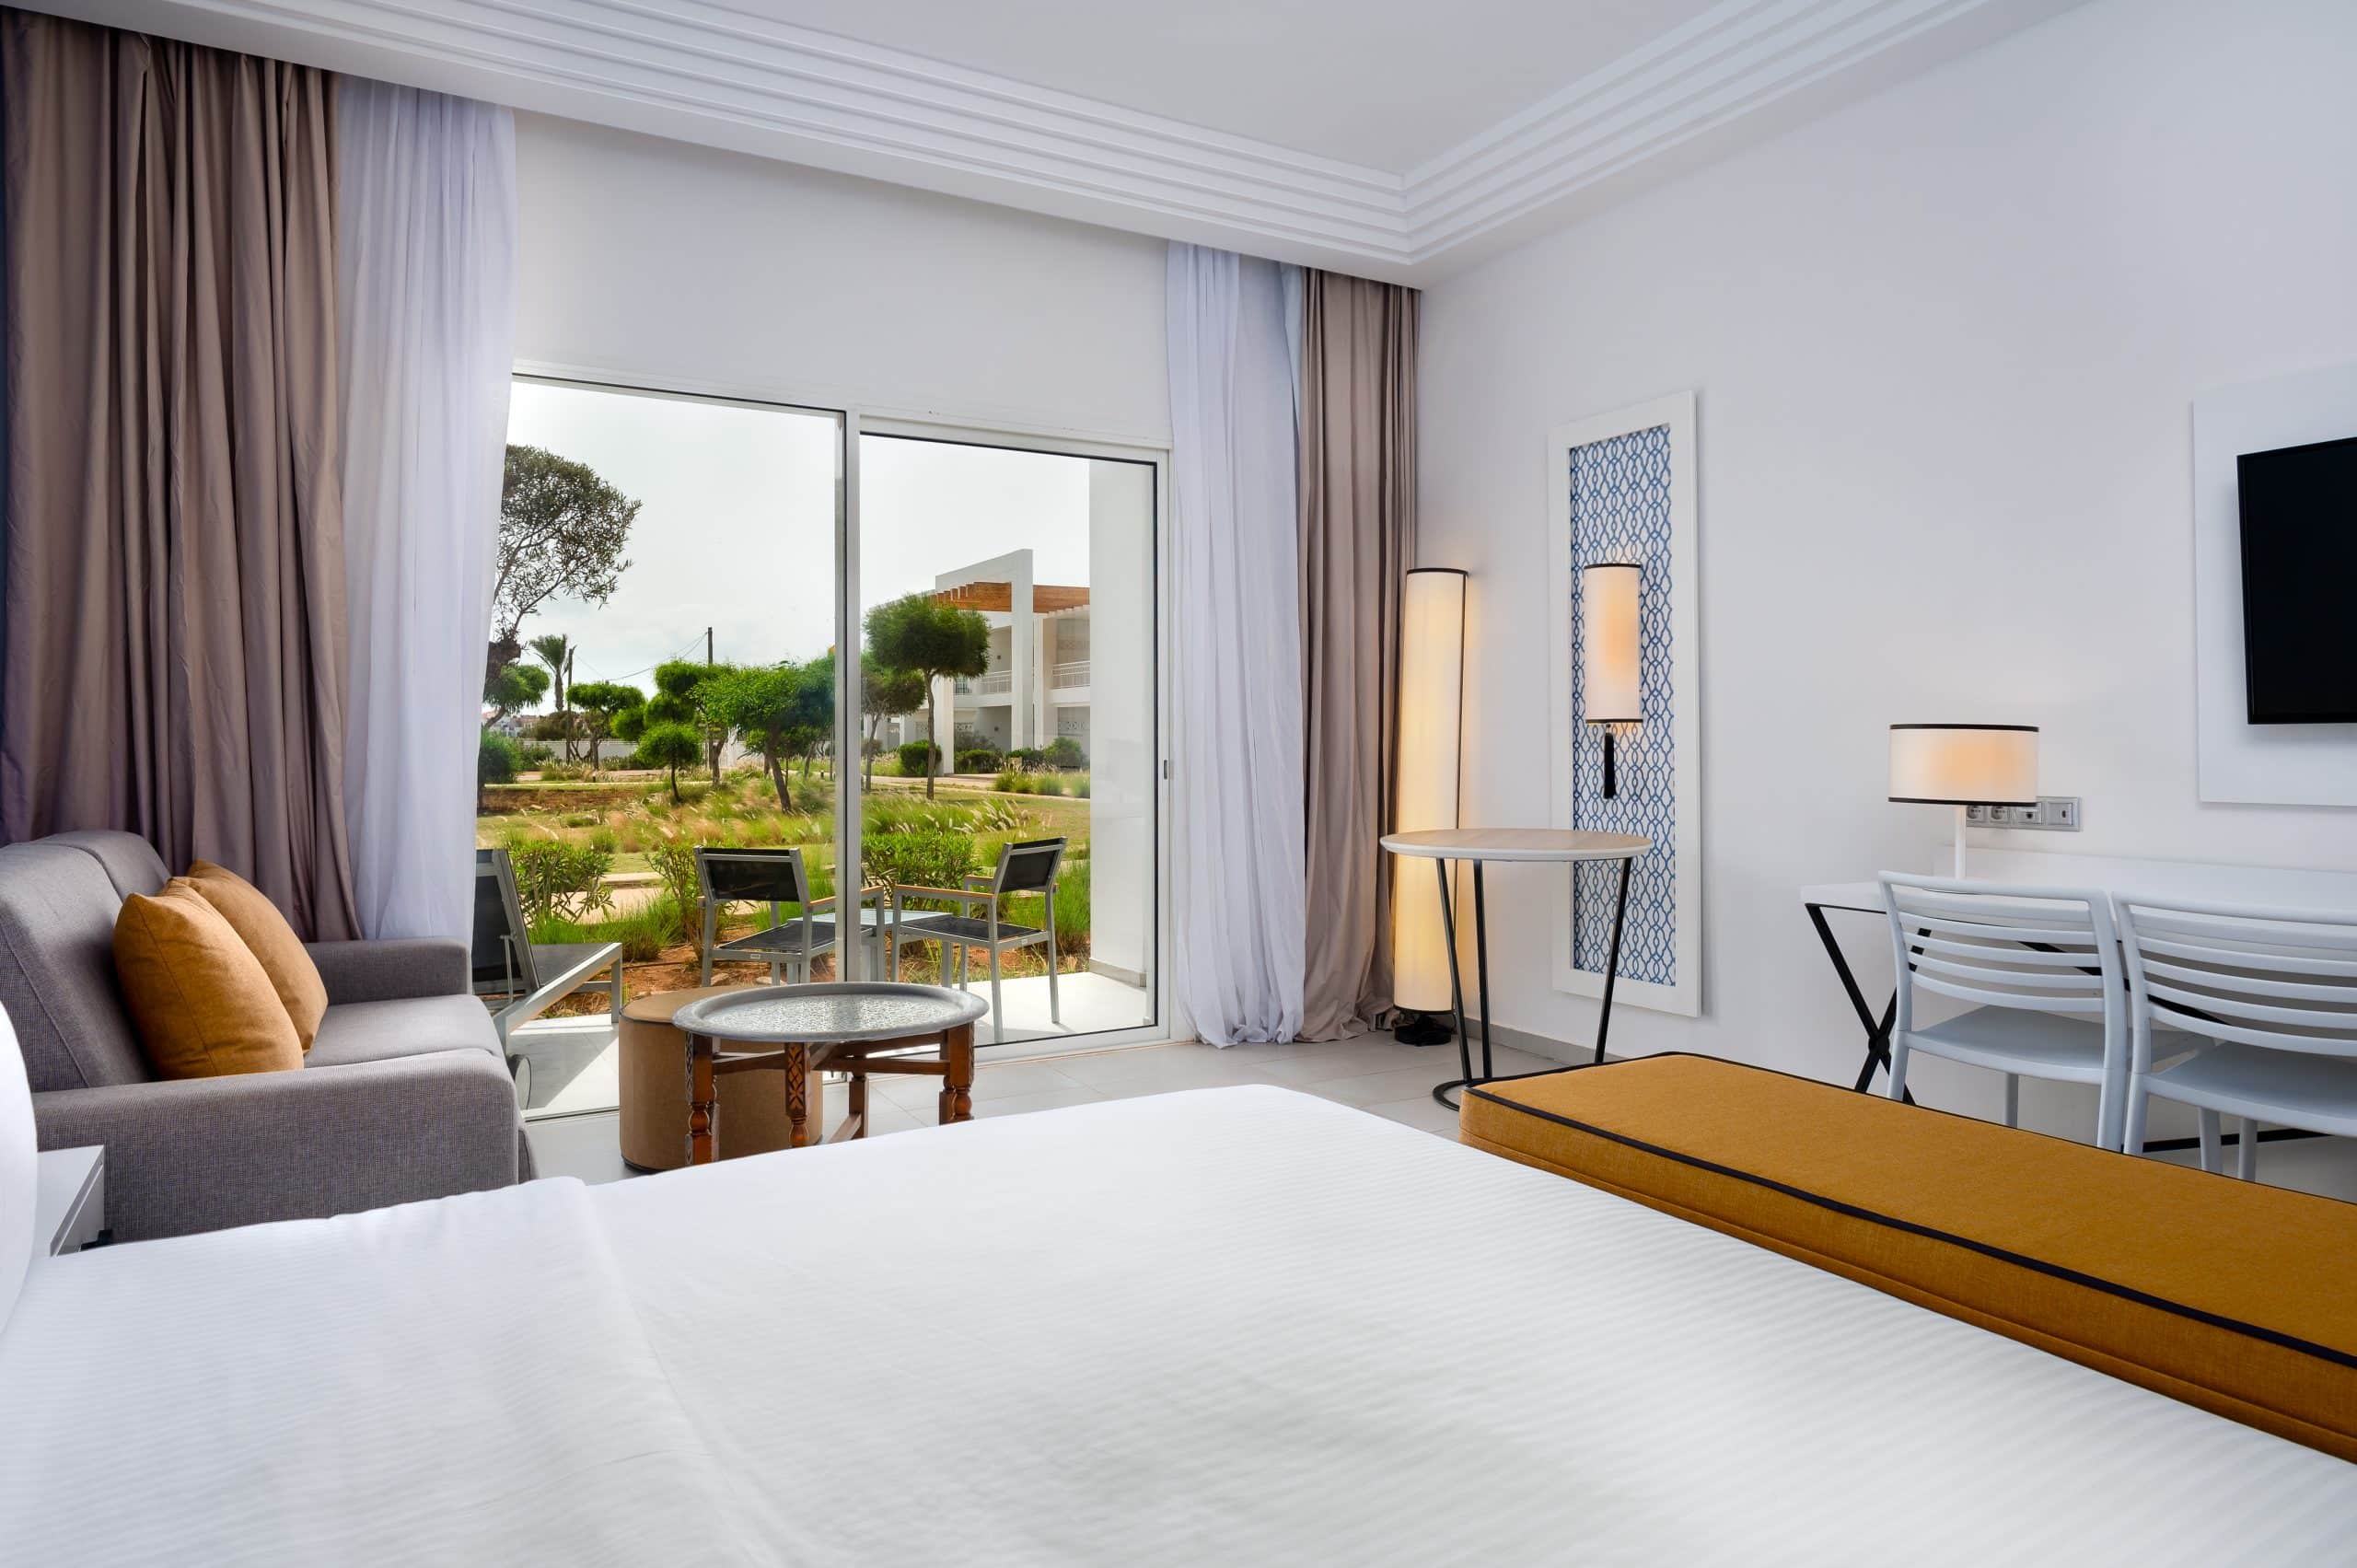 Radisson Hotel Group expands its Moroccan portfolio with a brand new resort within the “Blue Pearl” area